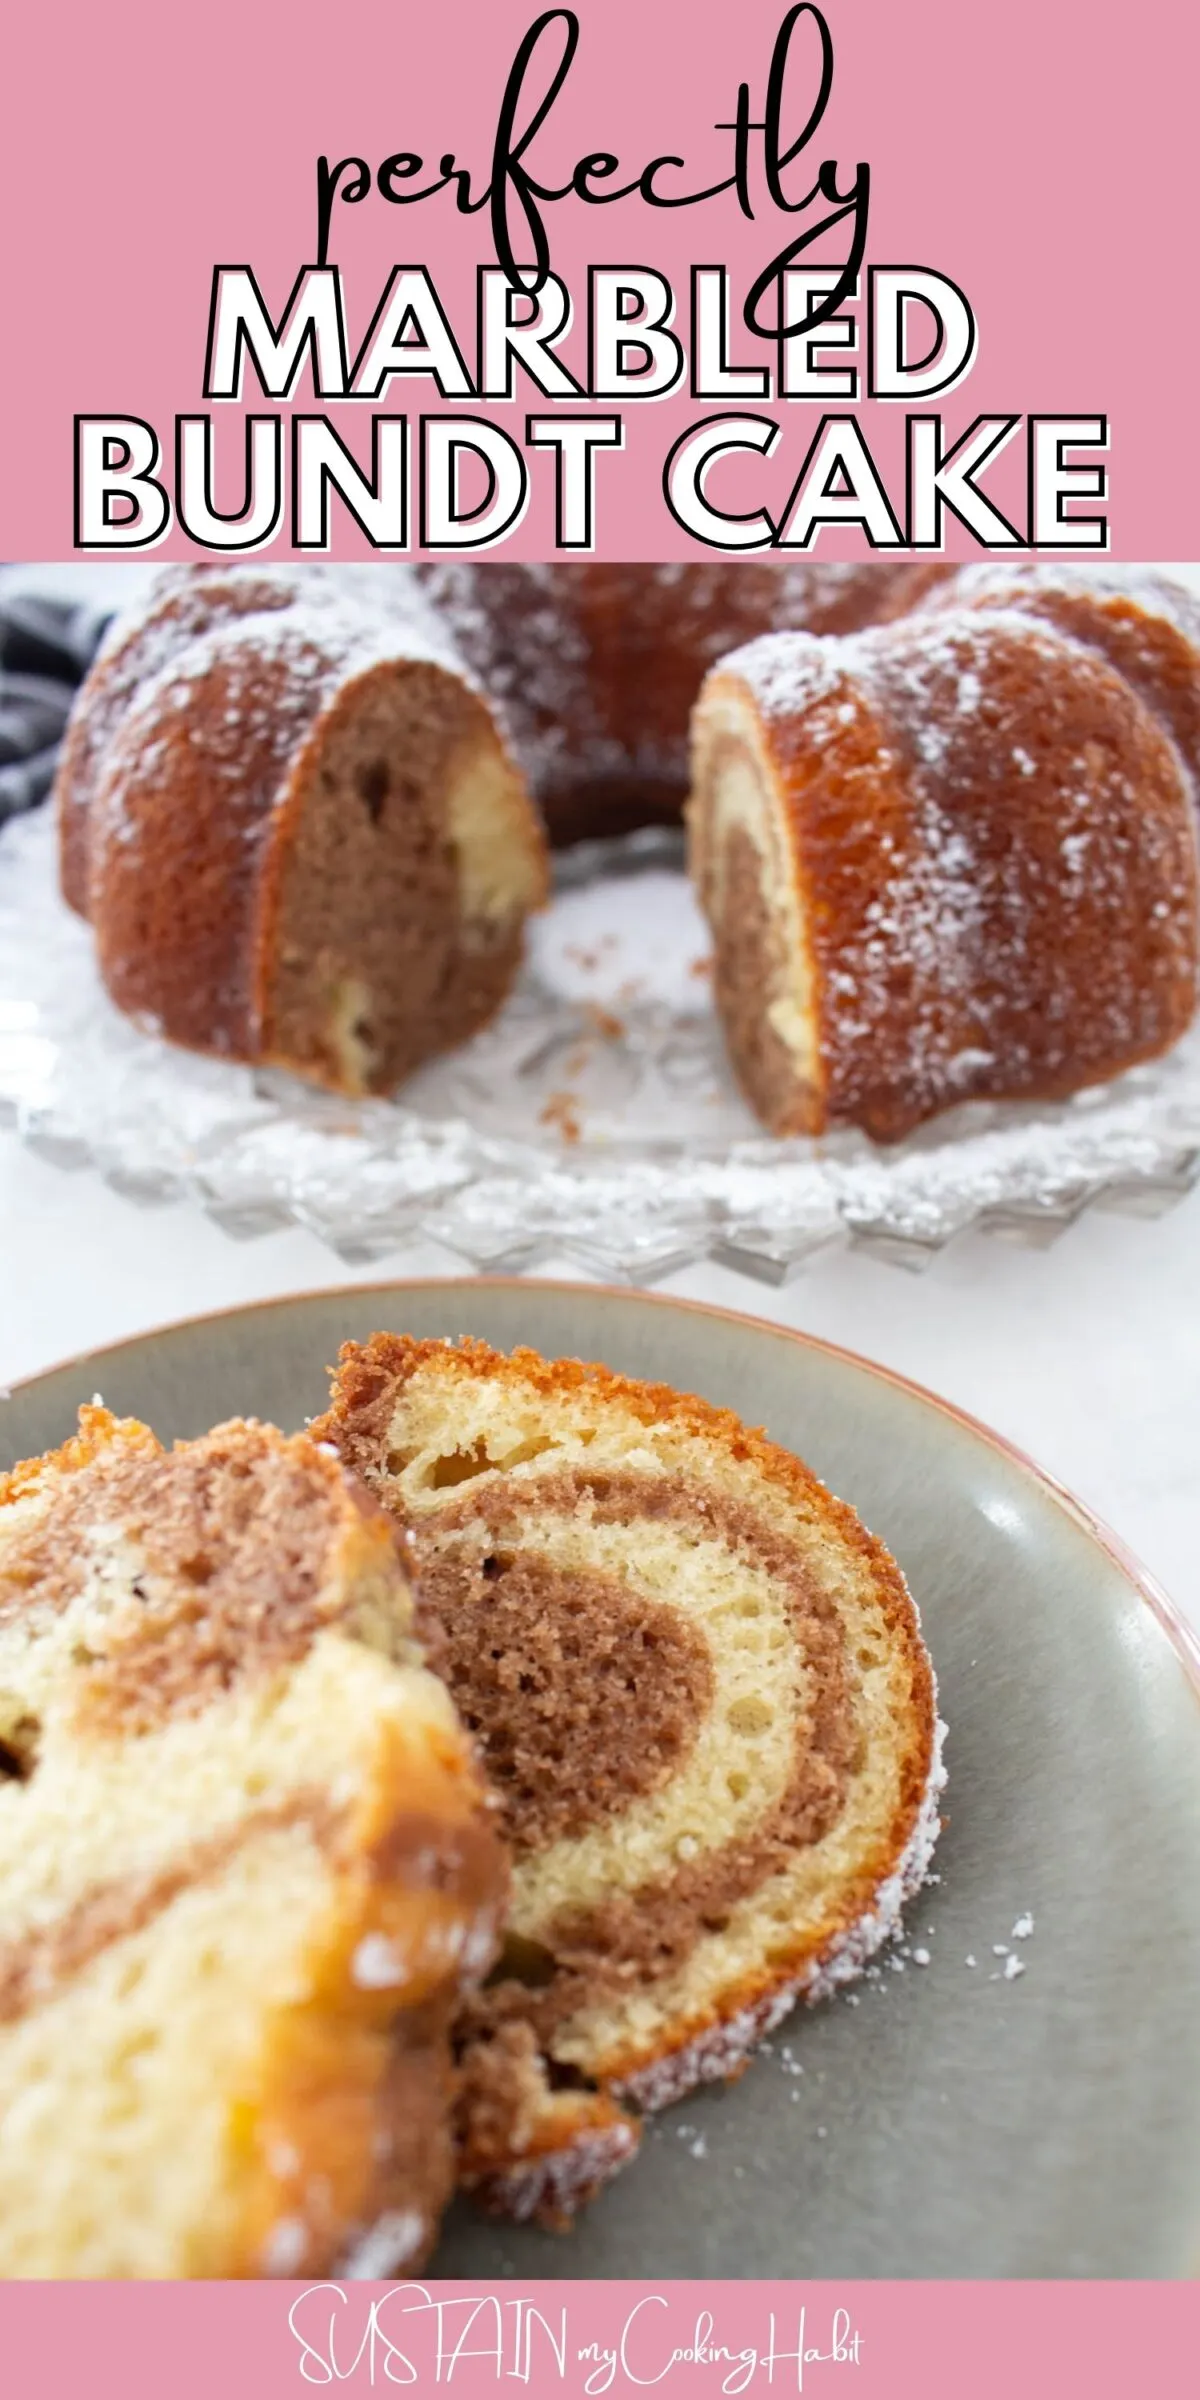 Close up of a marbled bundt cake with a slice taken out and placed on a plate.